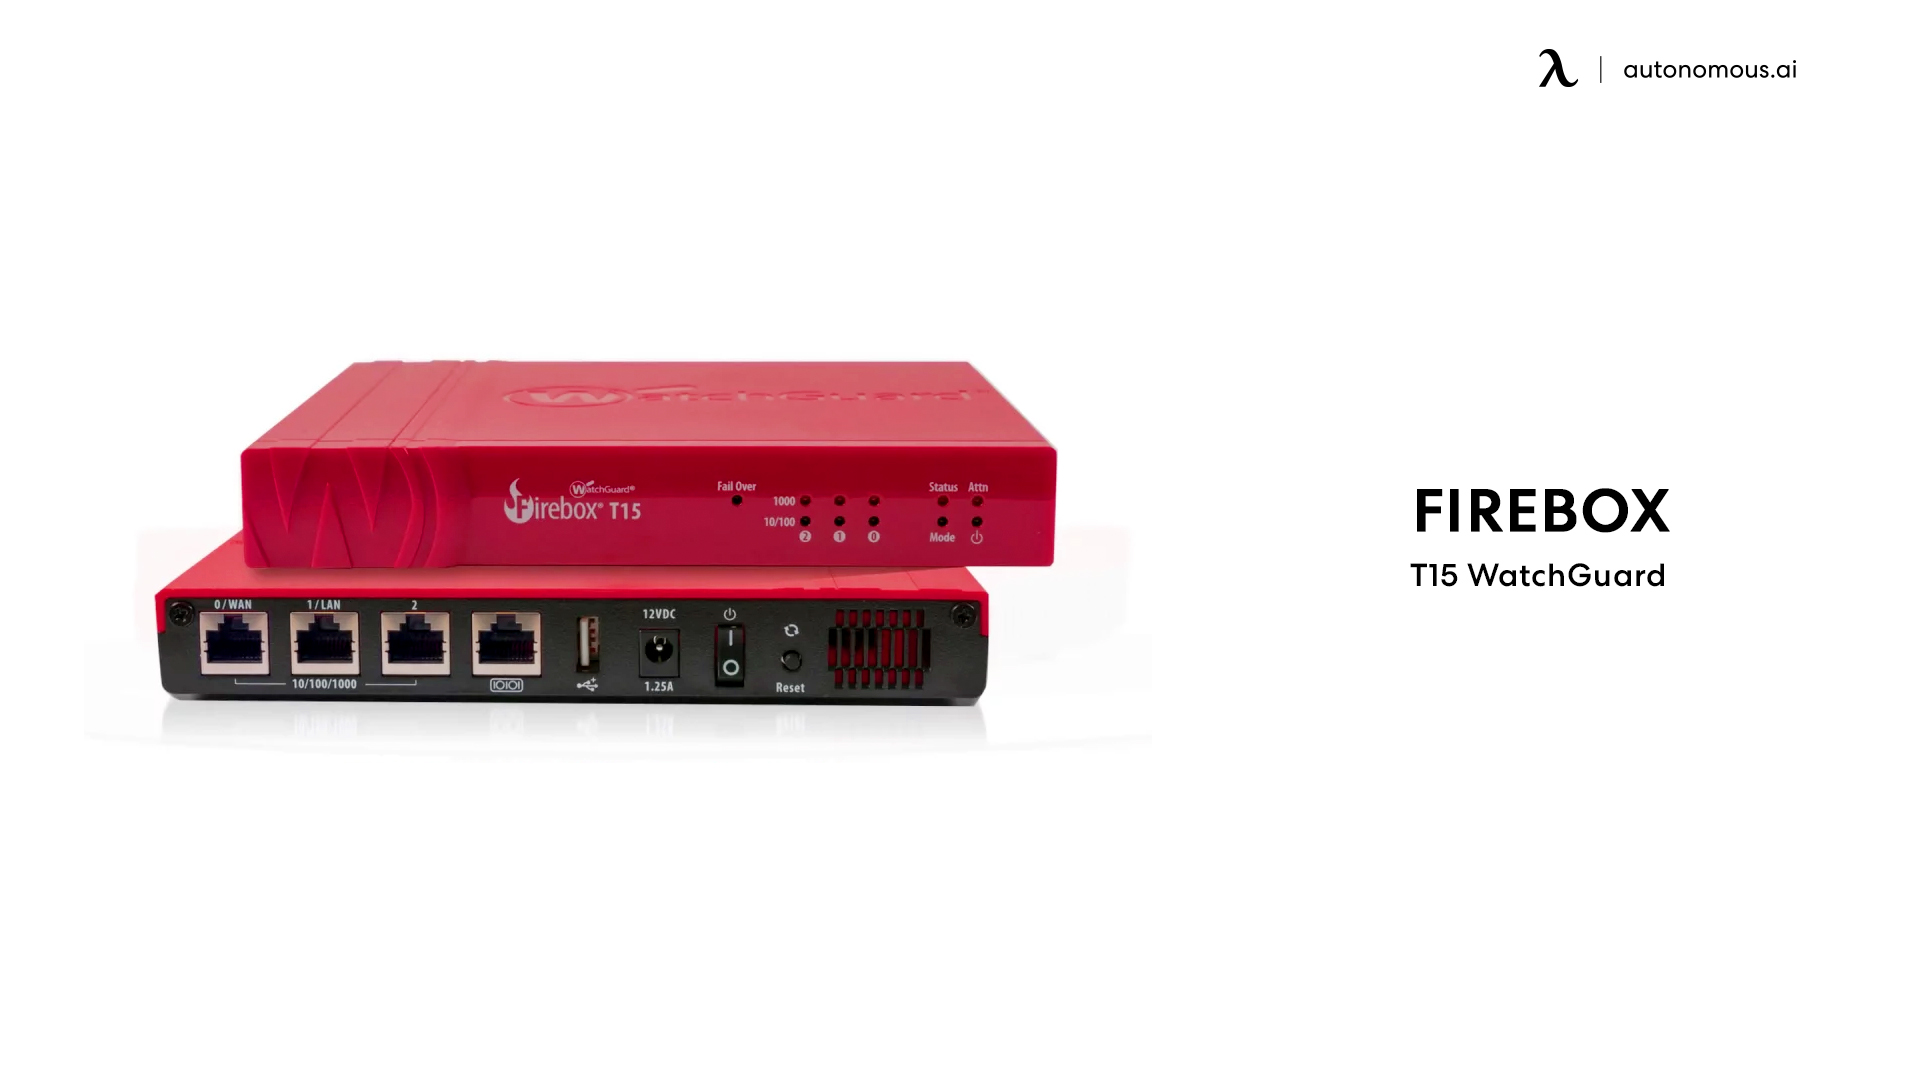 T15 WatchGuard Firebox home network security devices